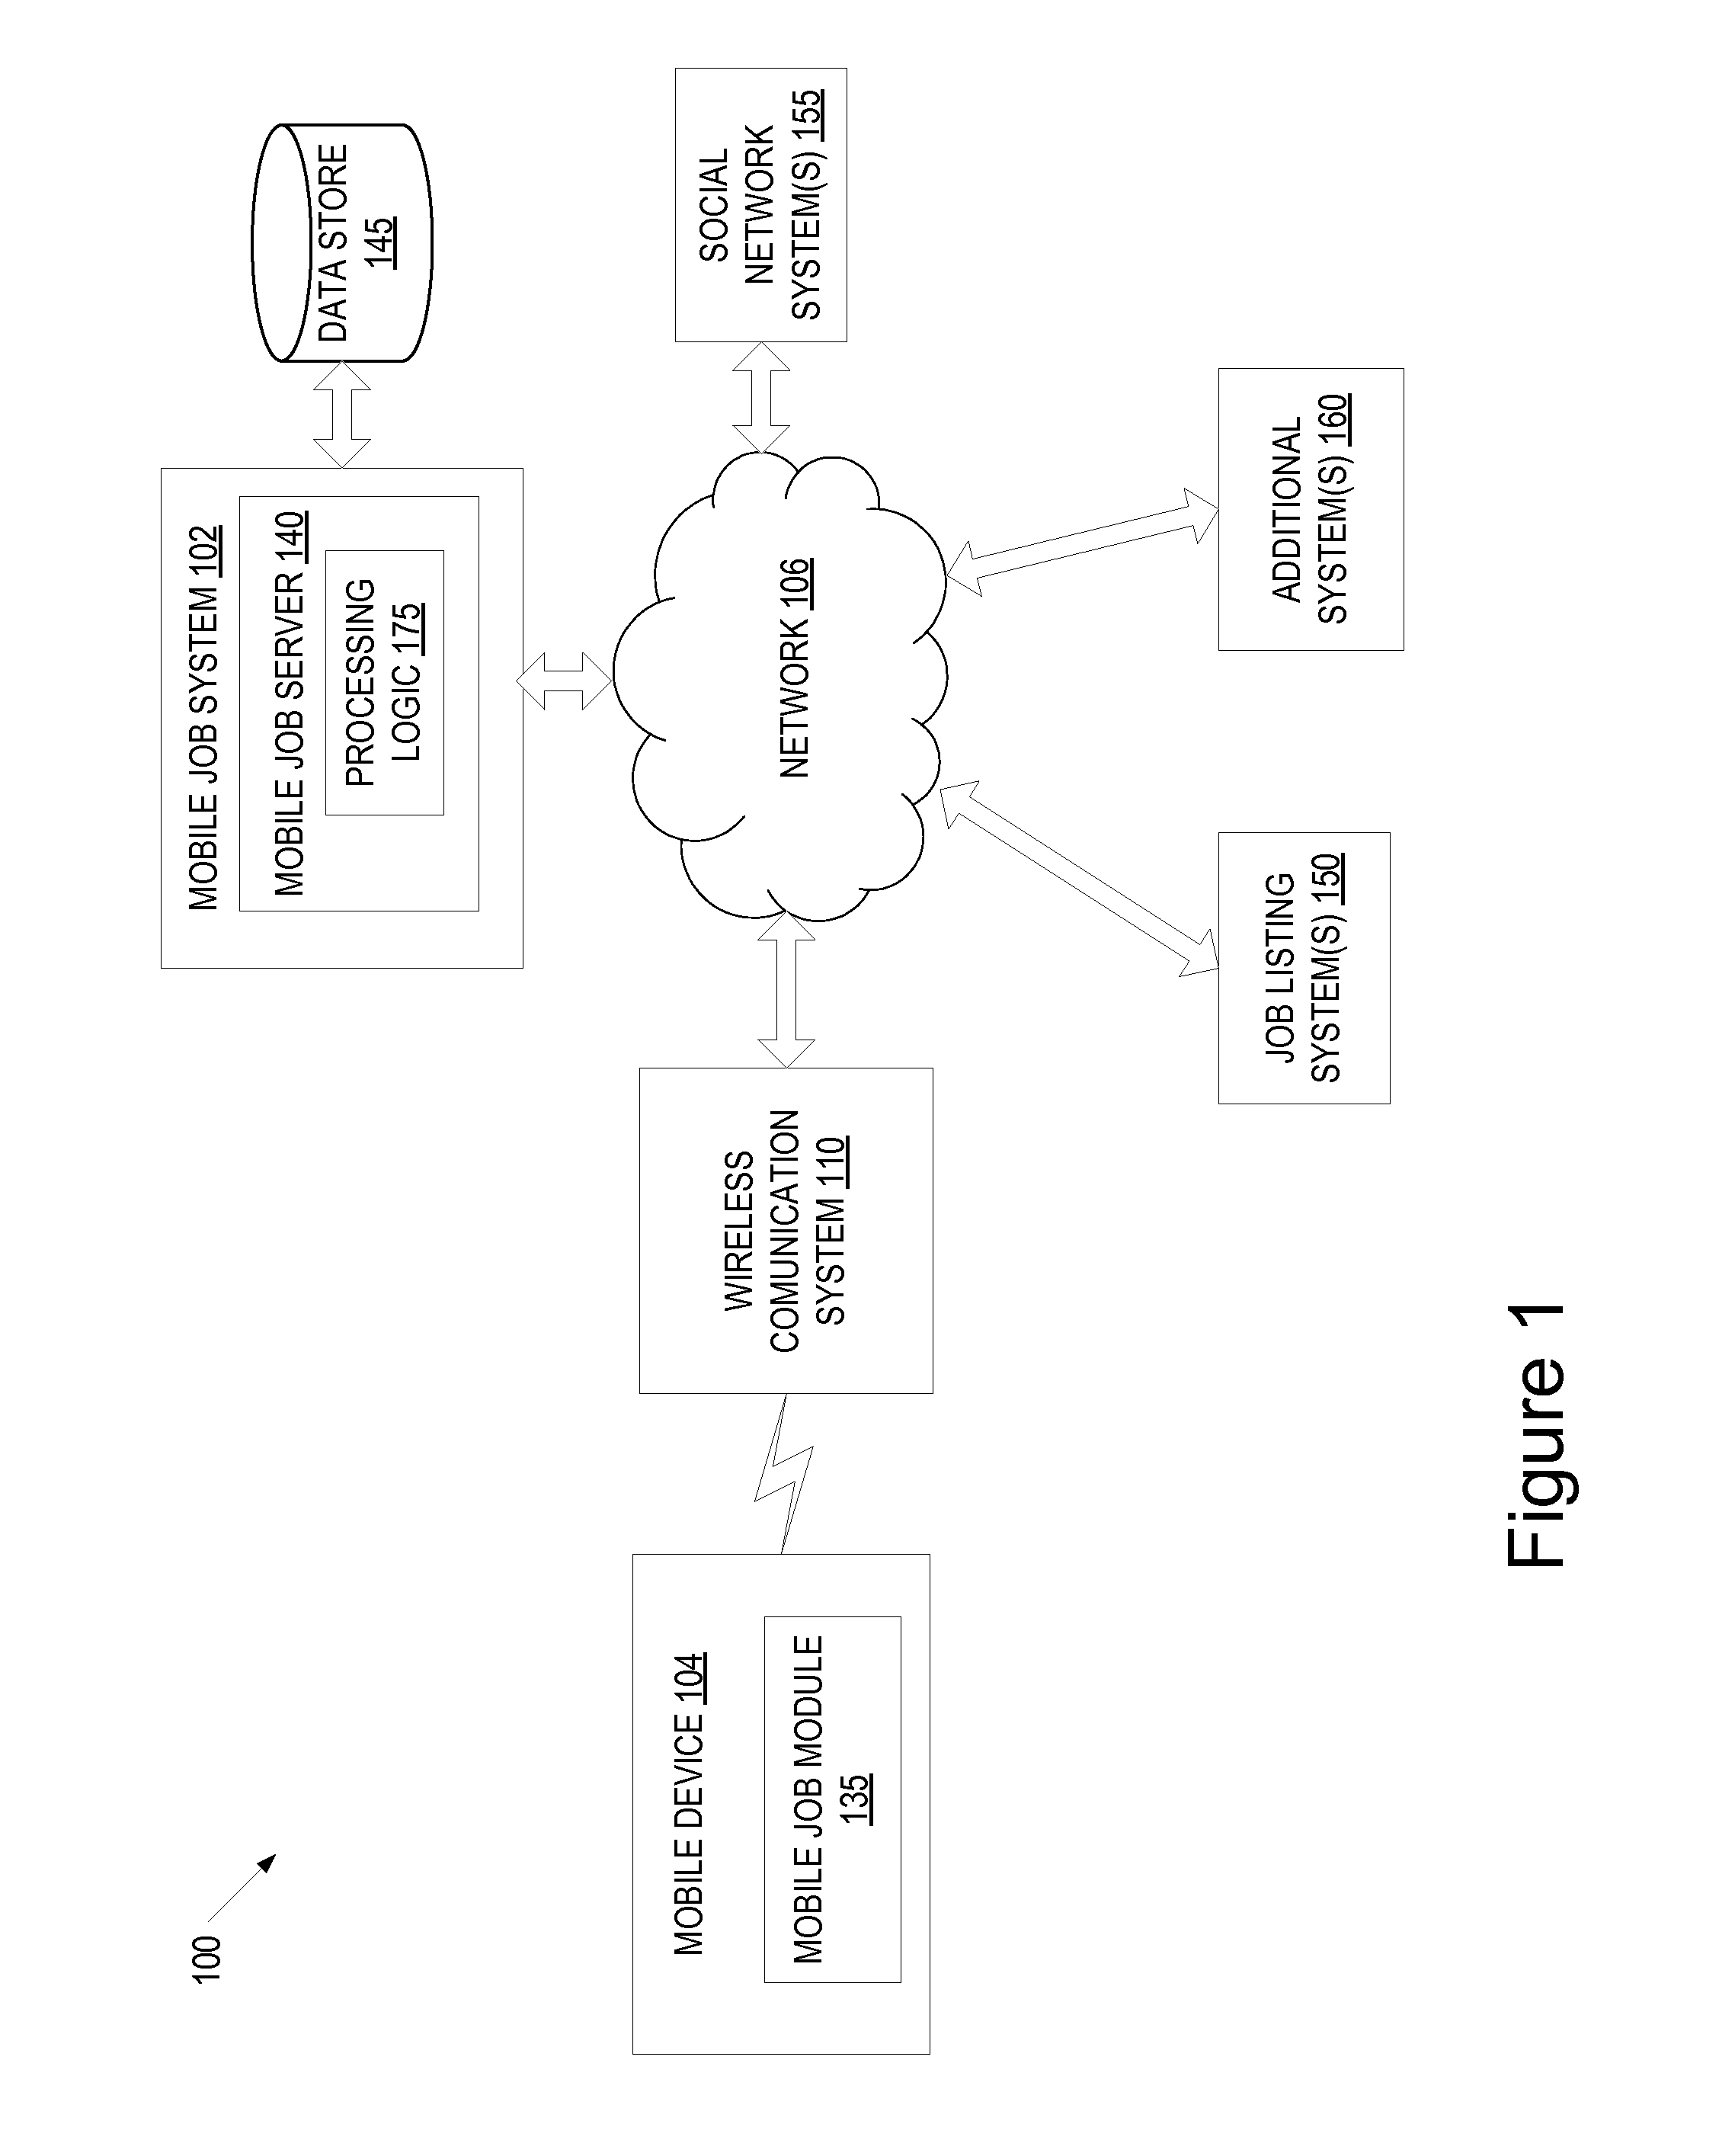 Method and apparatus for hiring using social networks